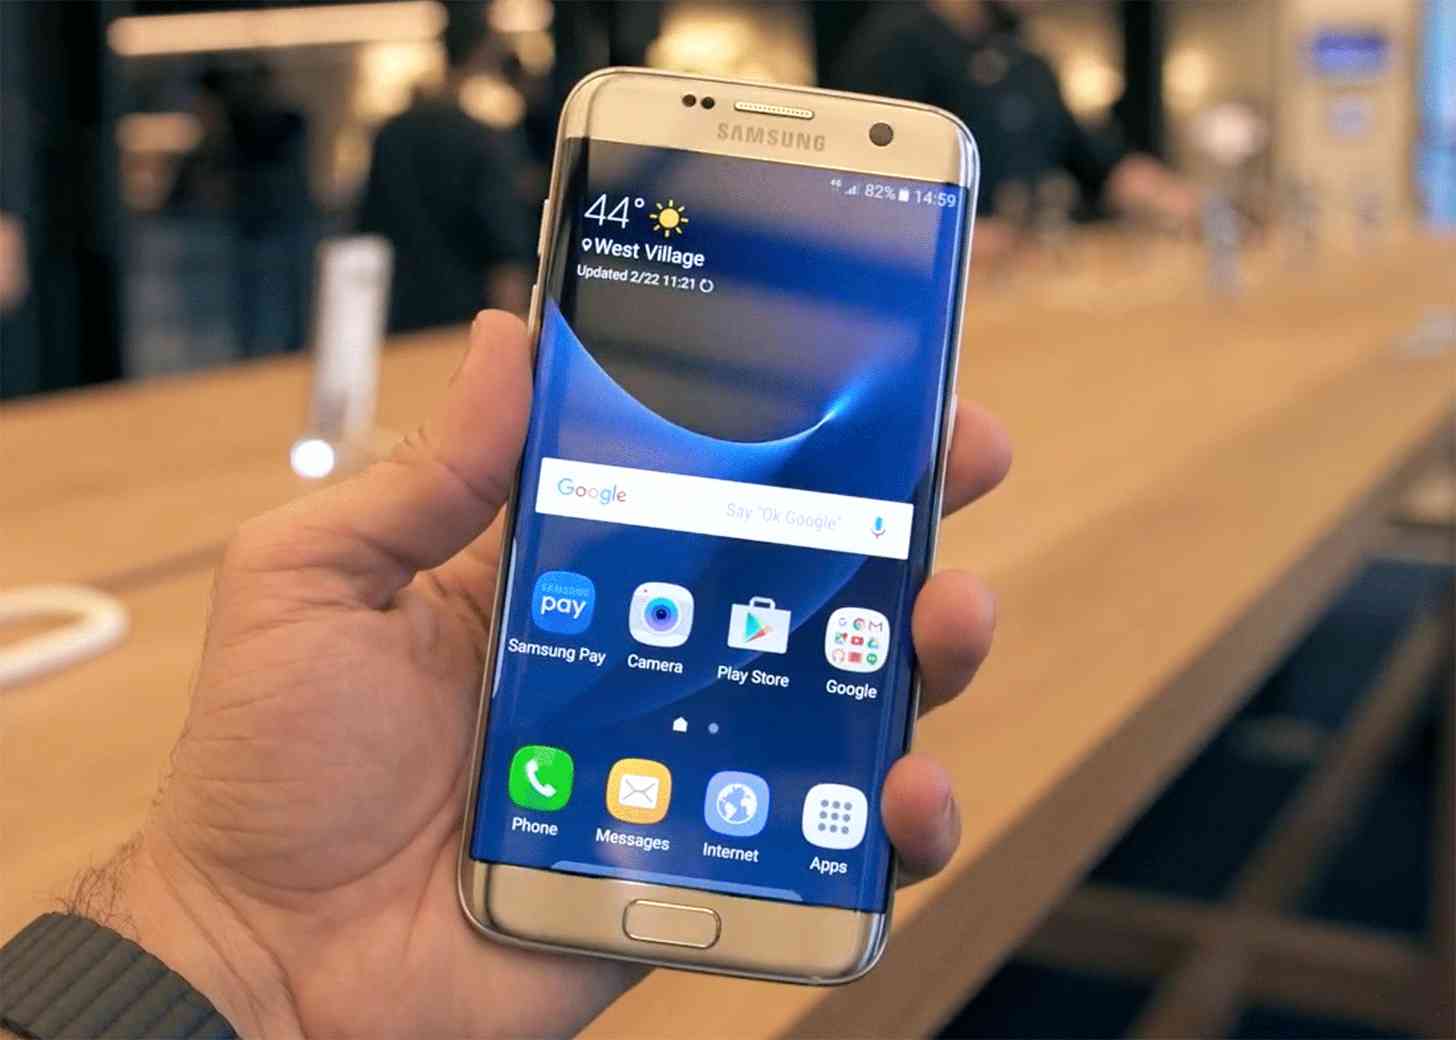 Samsung Galaxy S7 edge front hands on